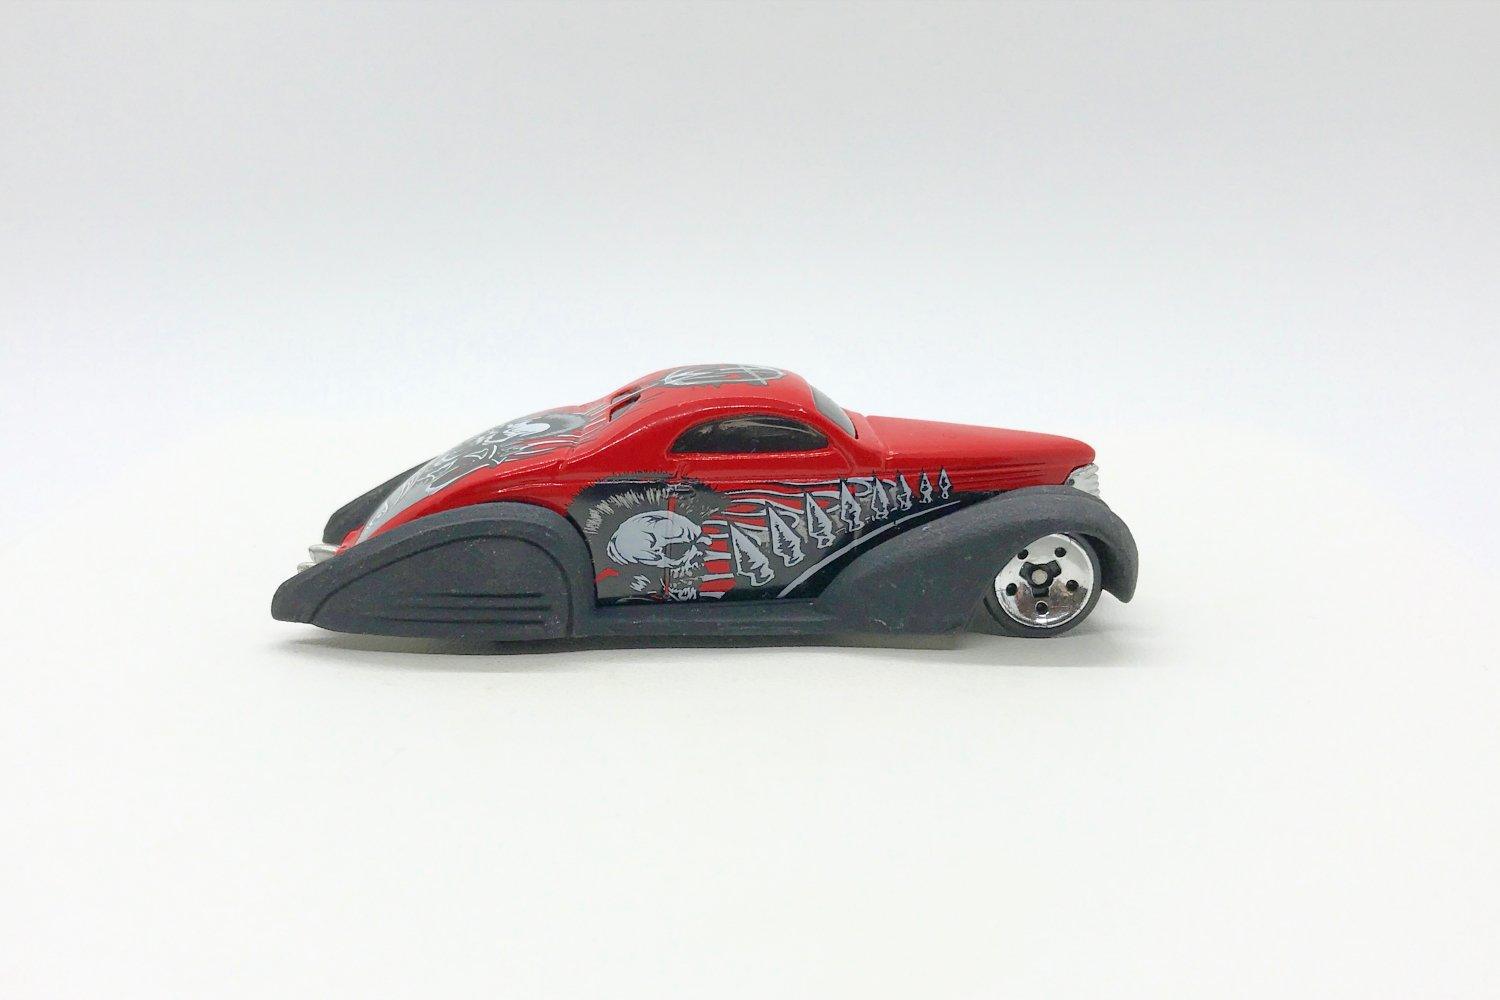 Hot Wheels Red Swoop Coupe (2004) - Lamoree’s Vintage